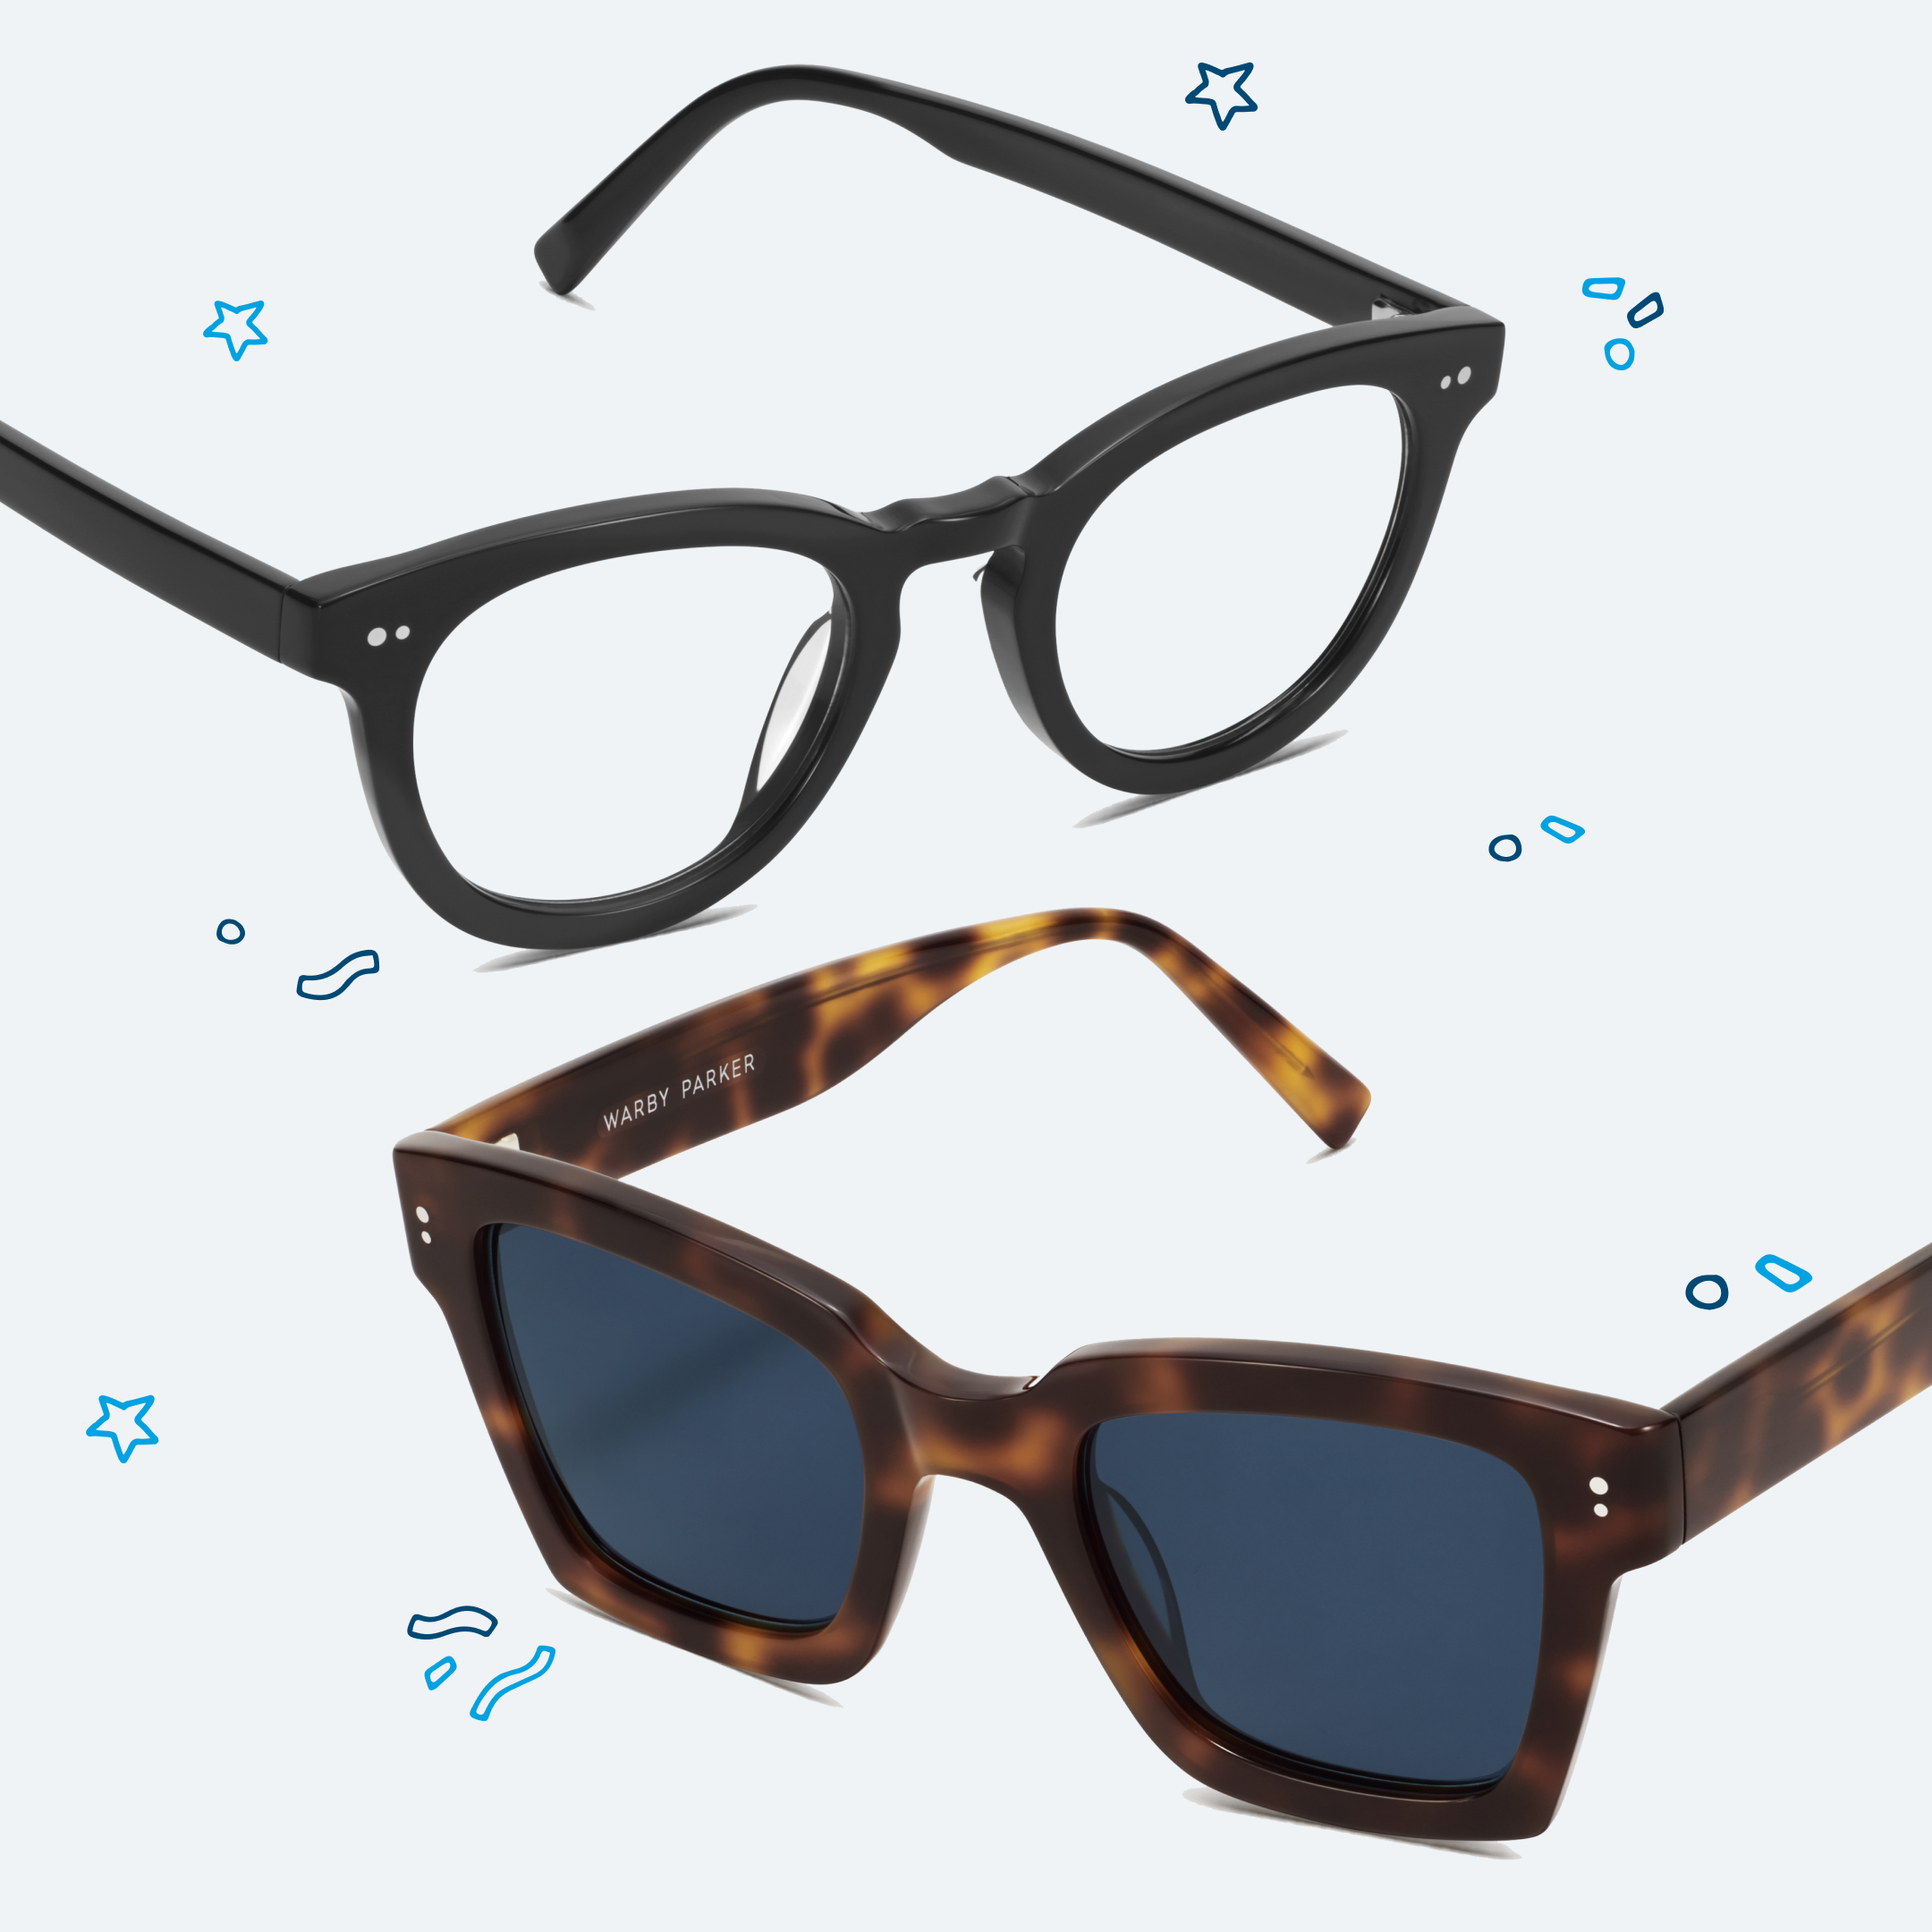 Add a Pair and Save from Warby Parker